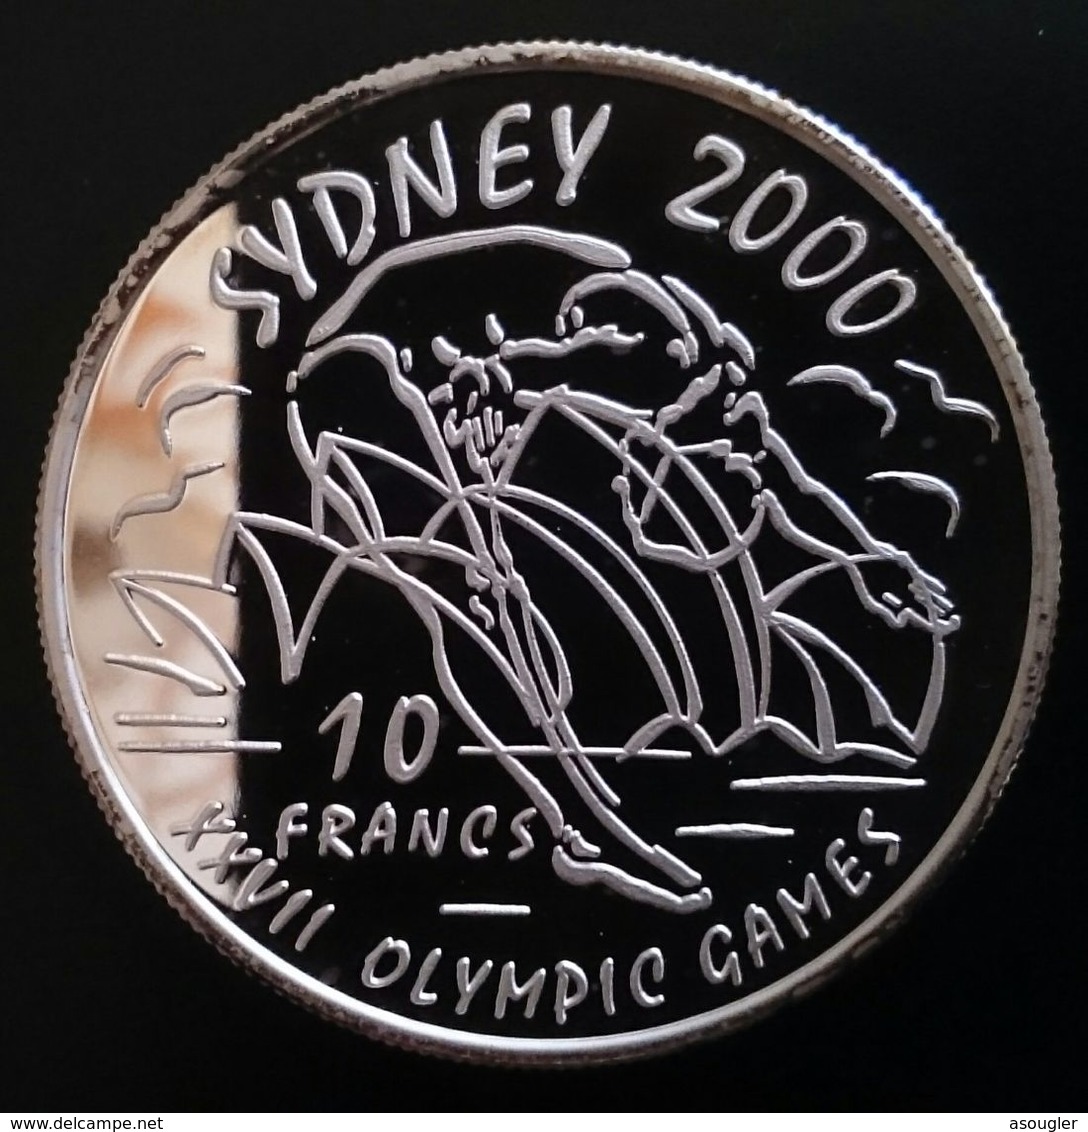 Congo Democratic Republic 10 Francs 1999 SILVER PROOF "Sydney 2000" Free Shipping Via Registered Air Mail - Congo (Democratic Republic 1998)